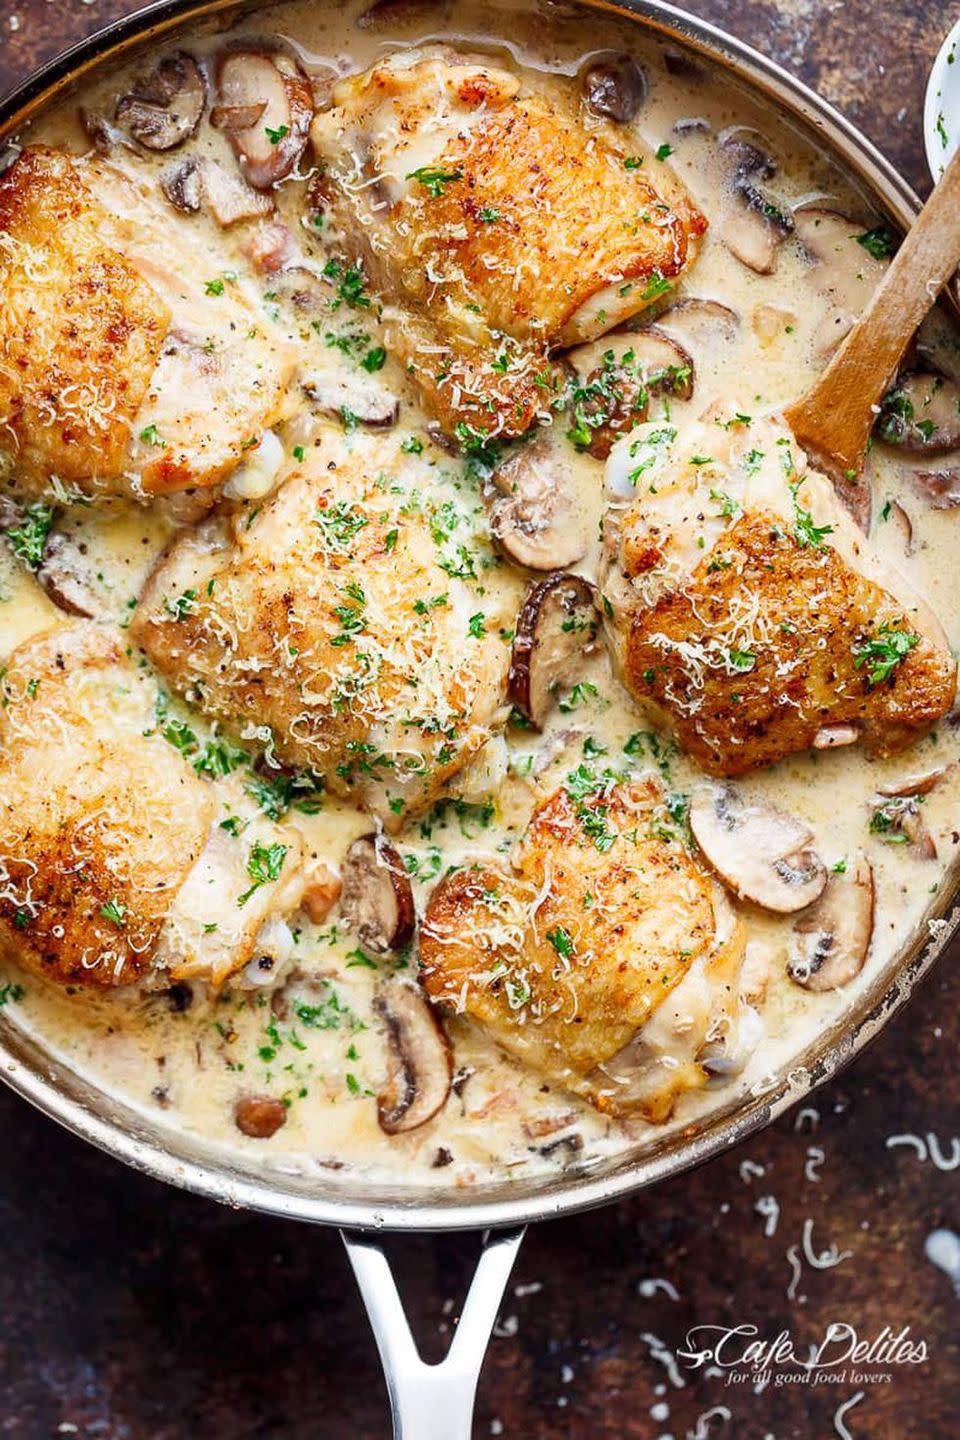 Creamy Herbed Chicken With Parmesan and Mushrooms